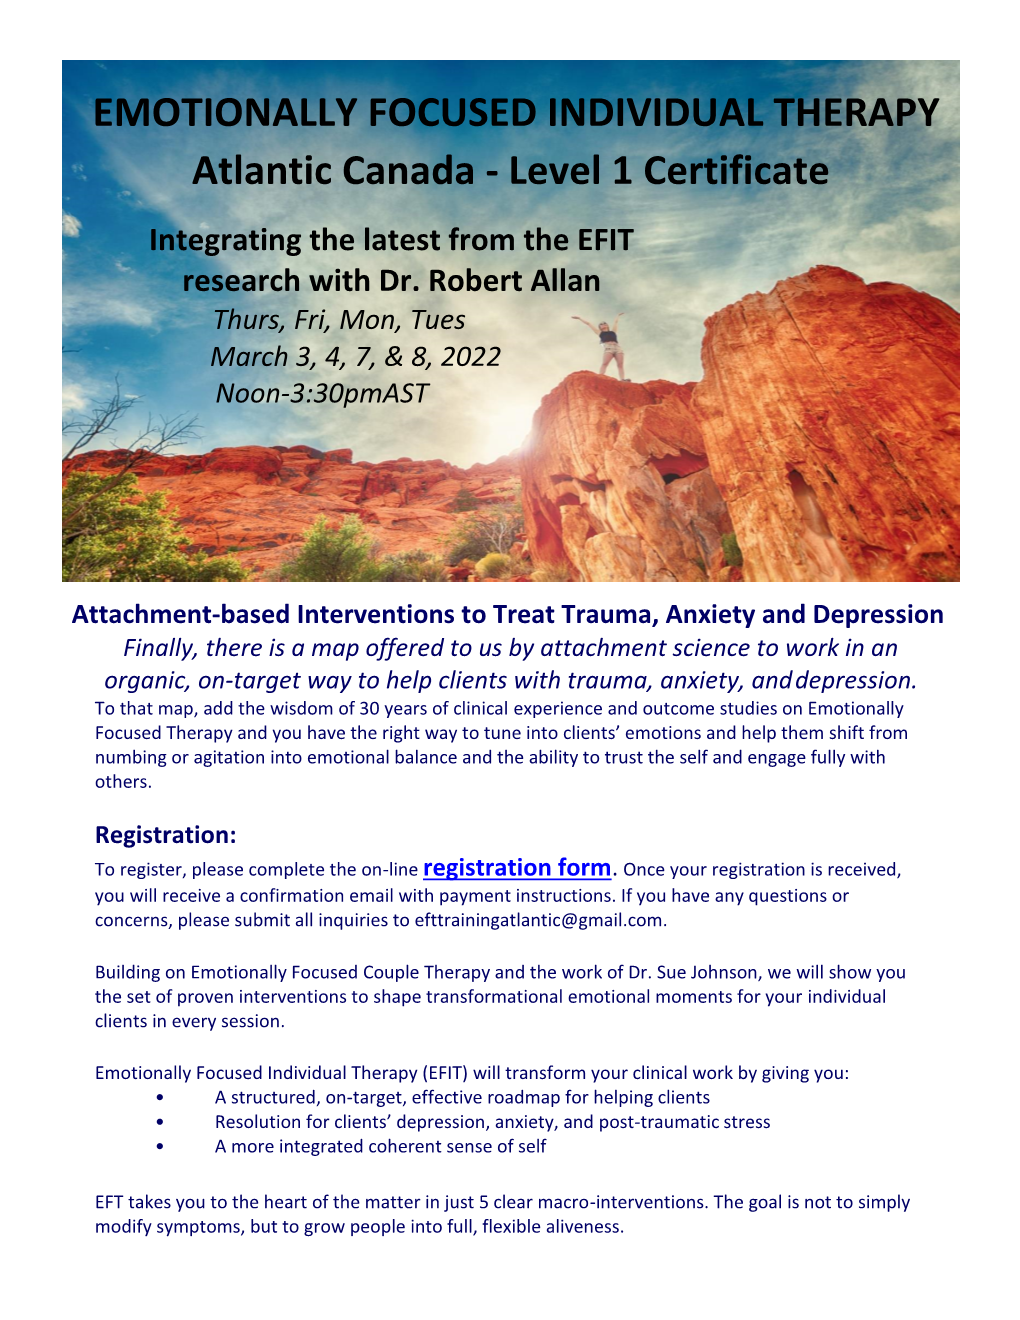 EMOTIONALLY FOCUSED INDIVIDUAL THERAPY Atlantic Canada - Level 1 Certificate Integrating the Latest from the EFIT Research with Dr